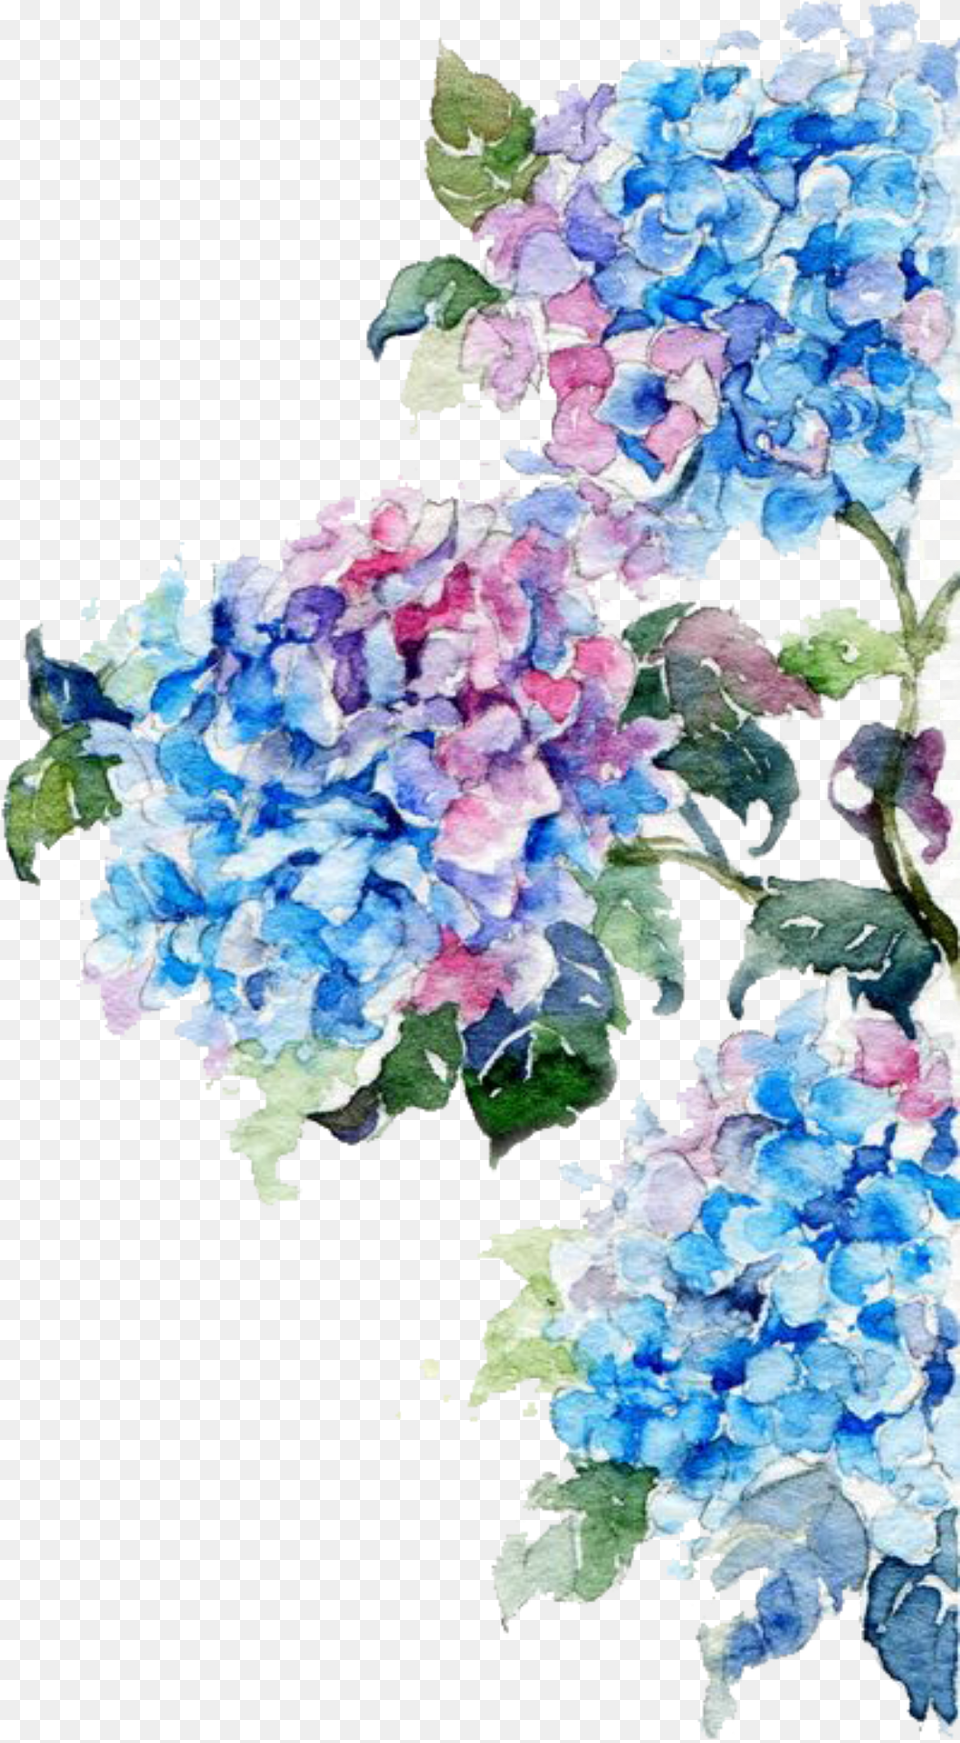 Watercolor Painting Flower Drawing Watercolor Flowers Watercolor Flowers Blue, Ice, Plant, Petal, Art Free Transparent Png